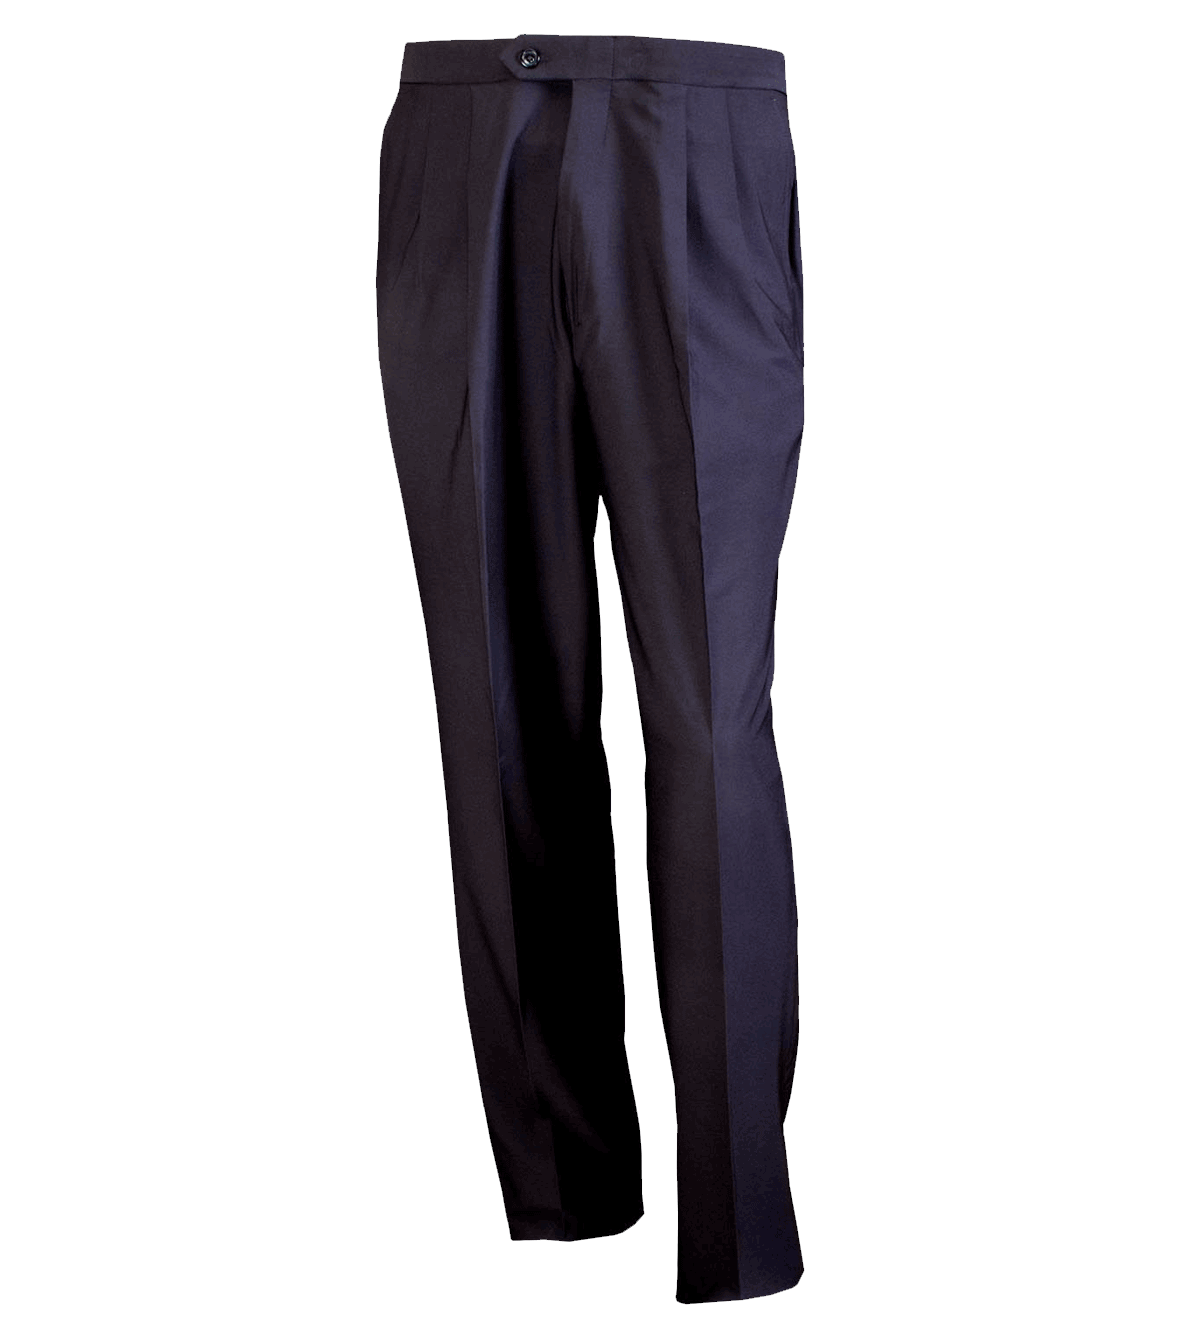 HONIG'S Women's 4-Way Stretch Pleated Pant